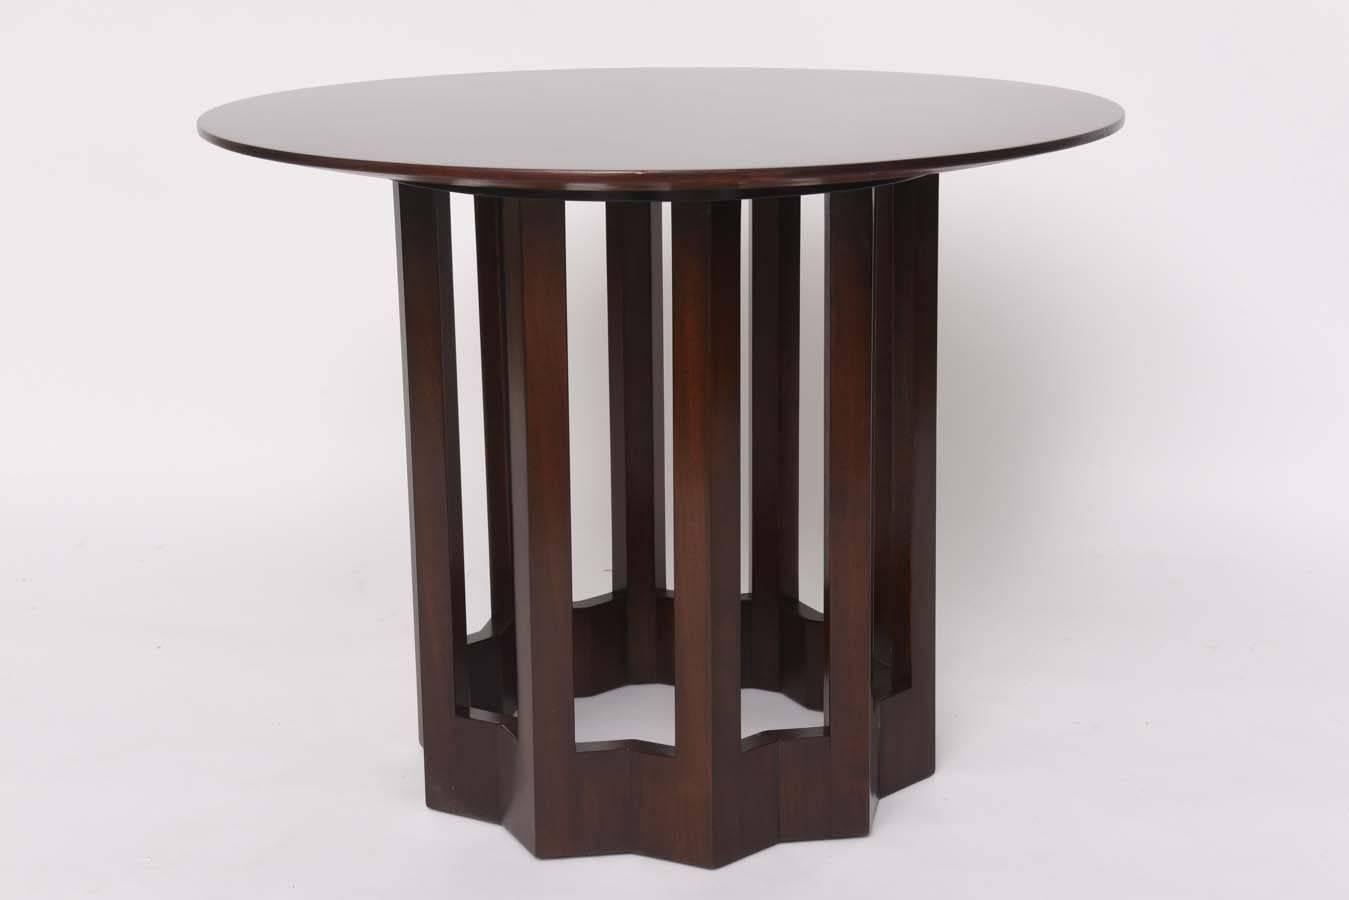 This stylish table was created by the iconic furniture designer Harvey Probber in 1960s. It is fabricated in walnut wood and has been professionally restored.

For best net trade price or additional questions regarding this item, please click the